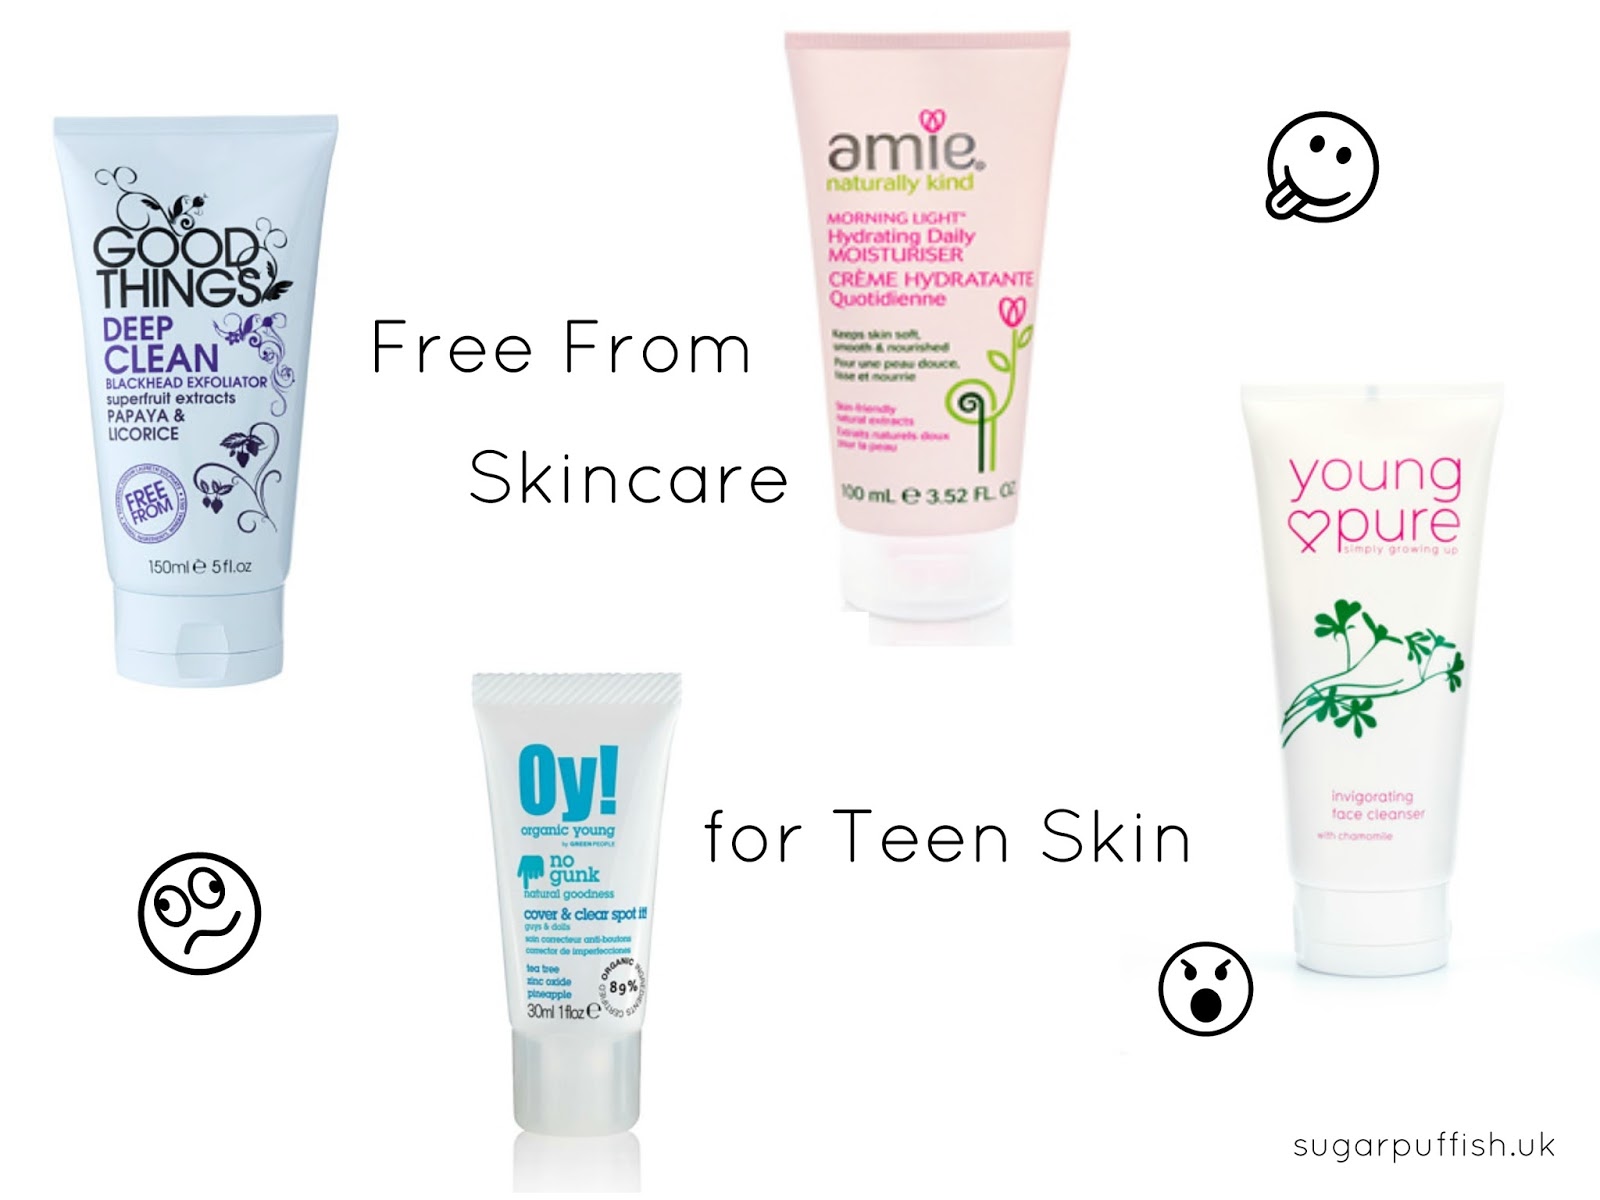 Free From Skincare for Teen Skin